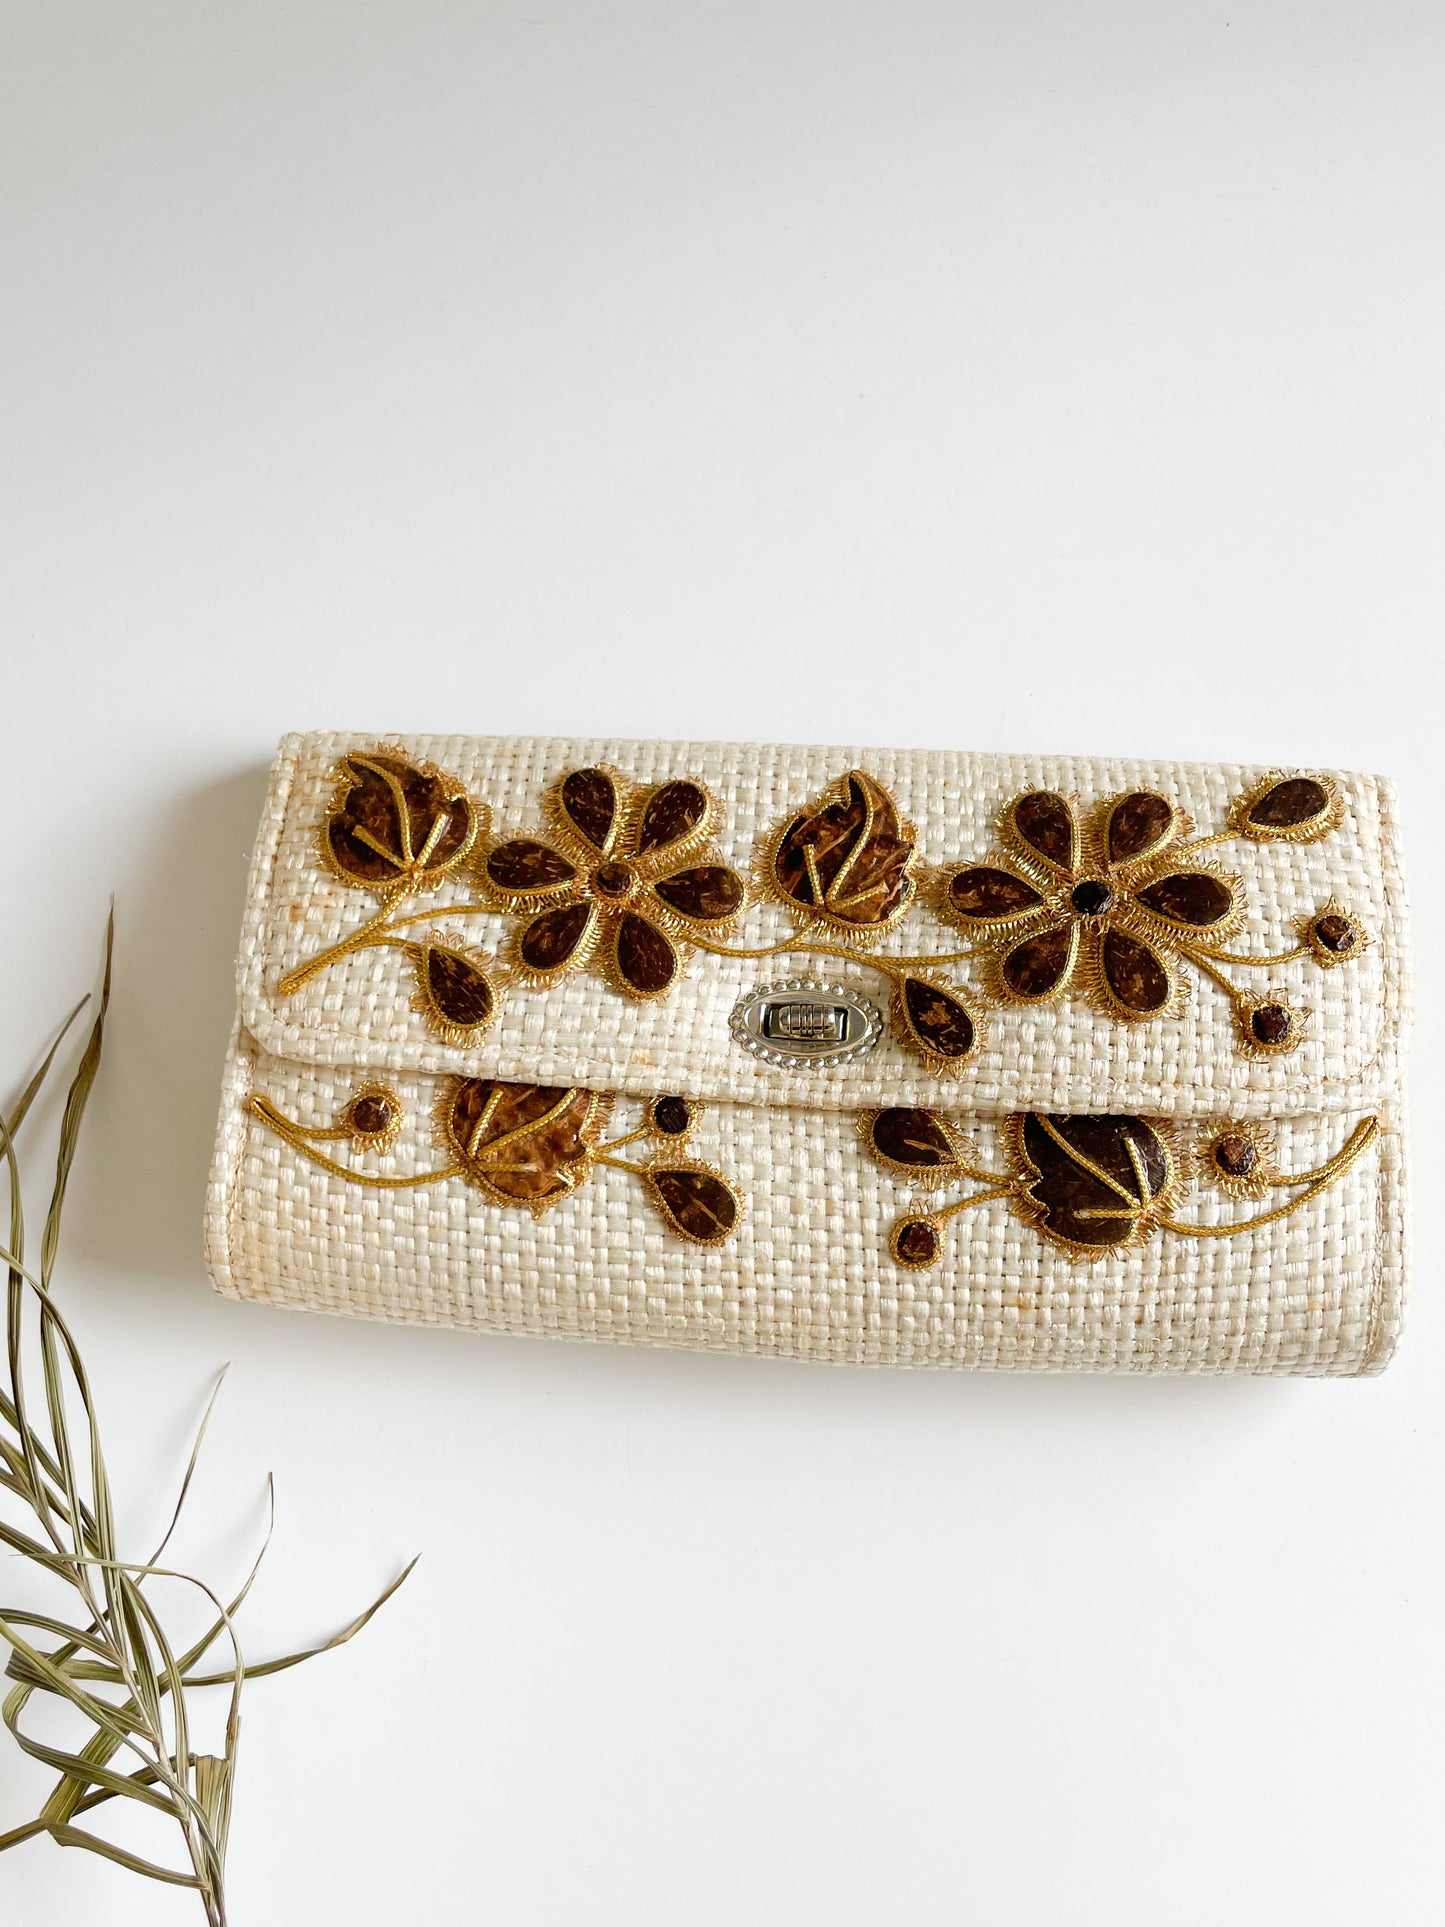 Vintage Bags By Patricia Cream Woven Gold Floral Textured Clutch Purse